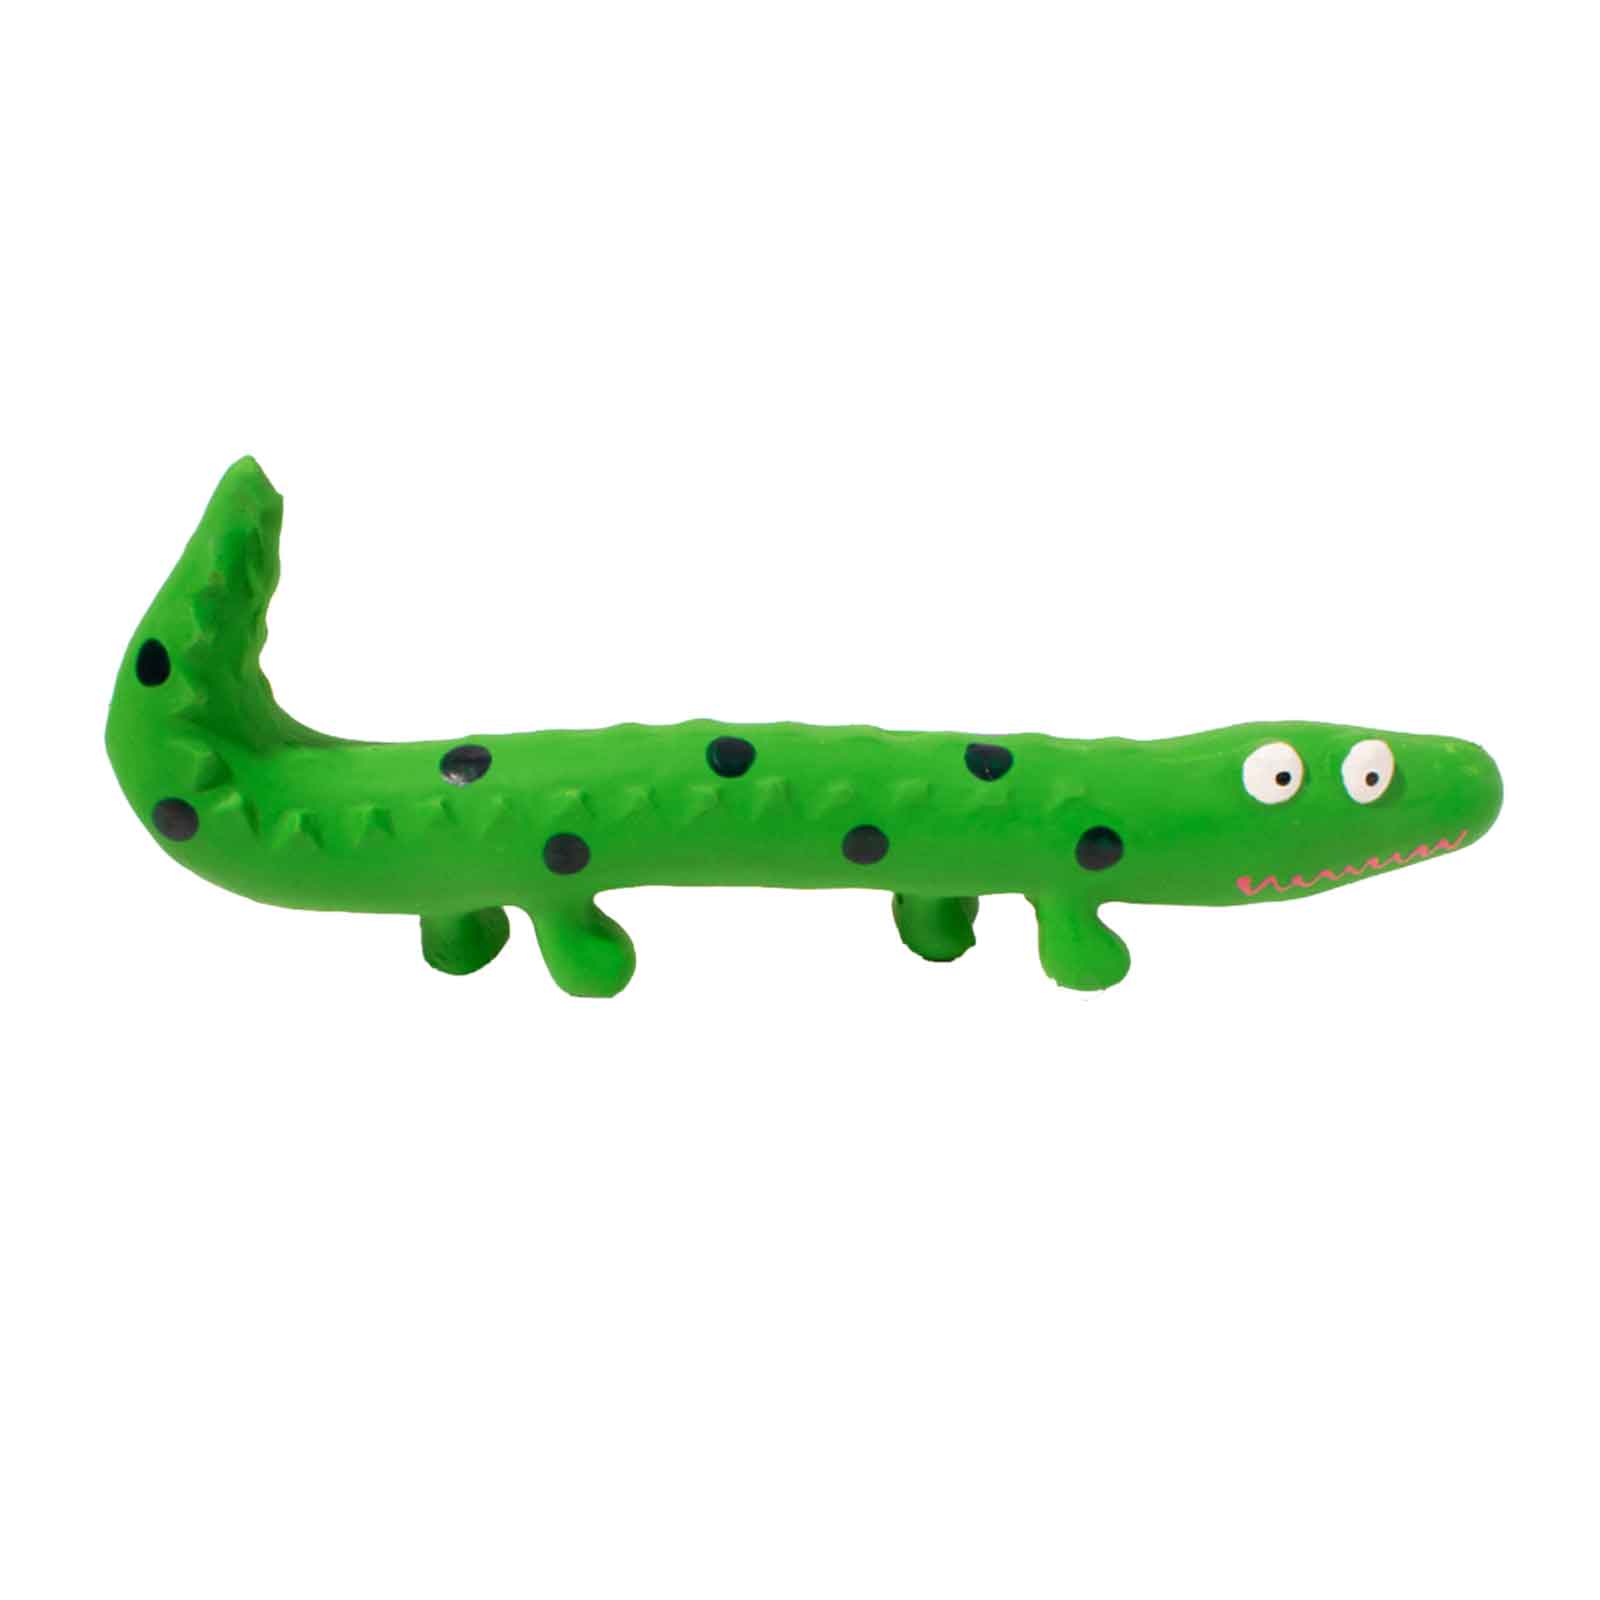 Pet Dog Latex Squeaky Toys Indestructible Bite-resistant Lizard Shape Sound Toys Pet Accessories For Small Medium Dogs (24 x 10cm)